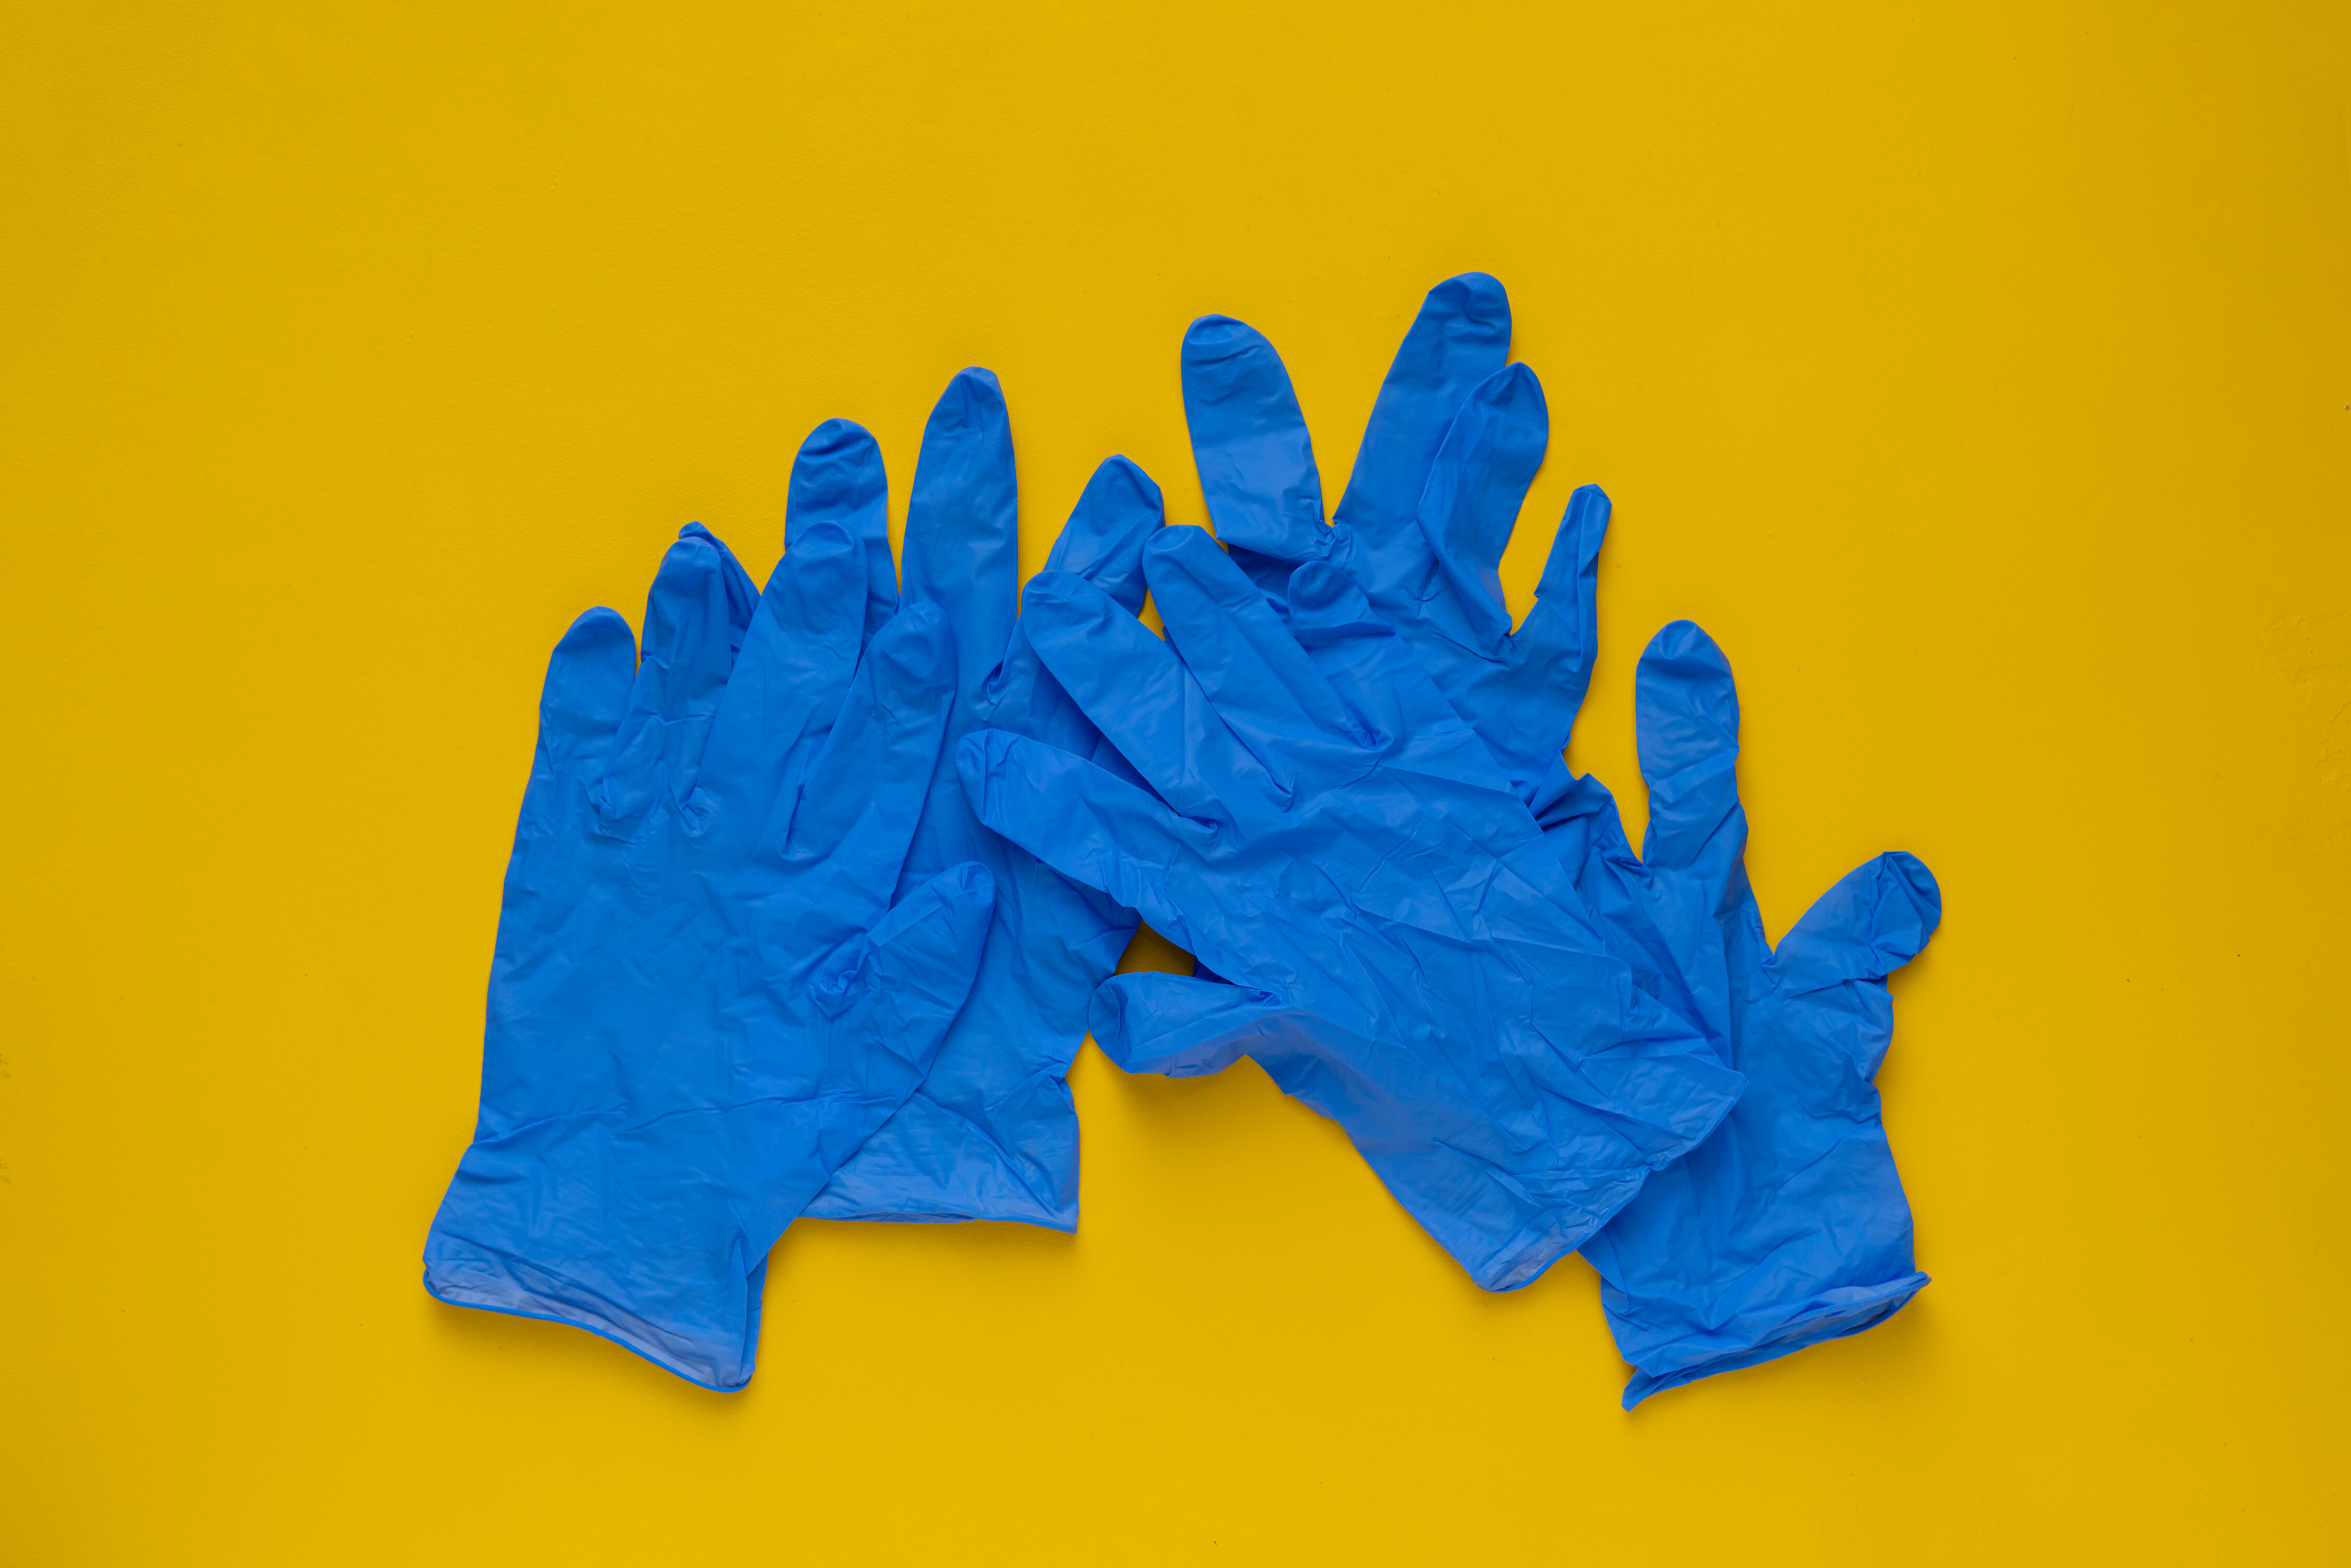 Details about   500 Pieces Plastic Gloves Disposable Hygiene Golves for Food and Home Clean 